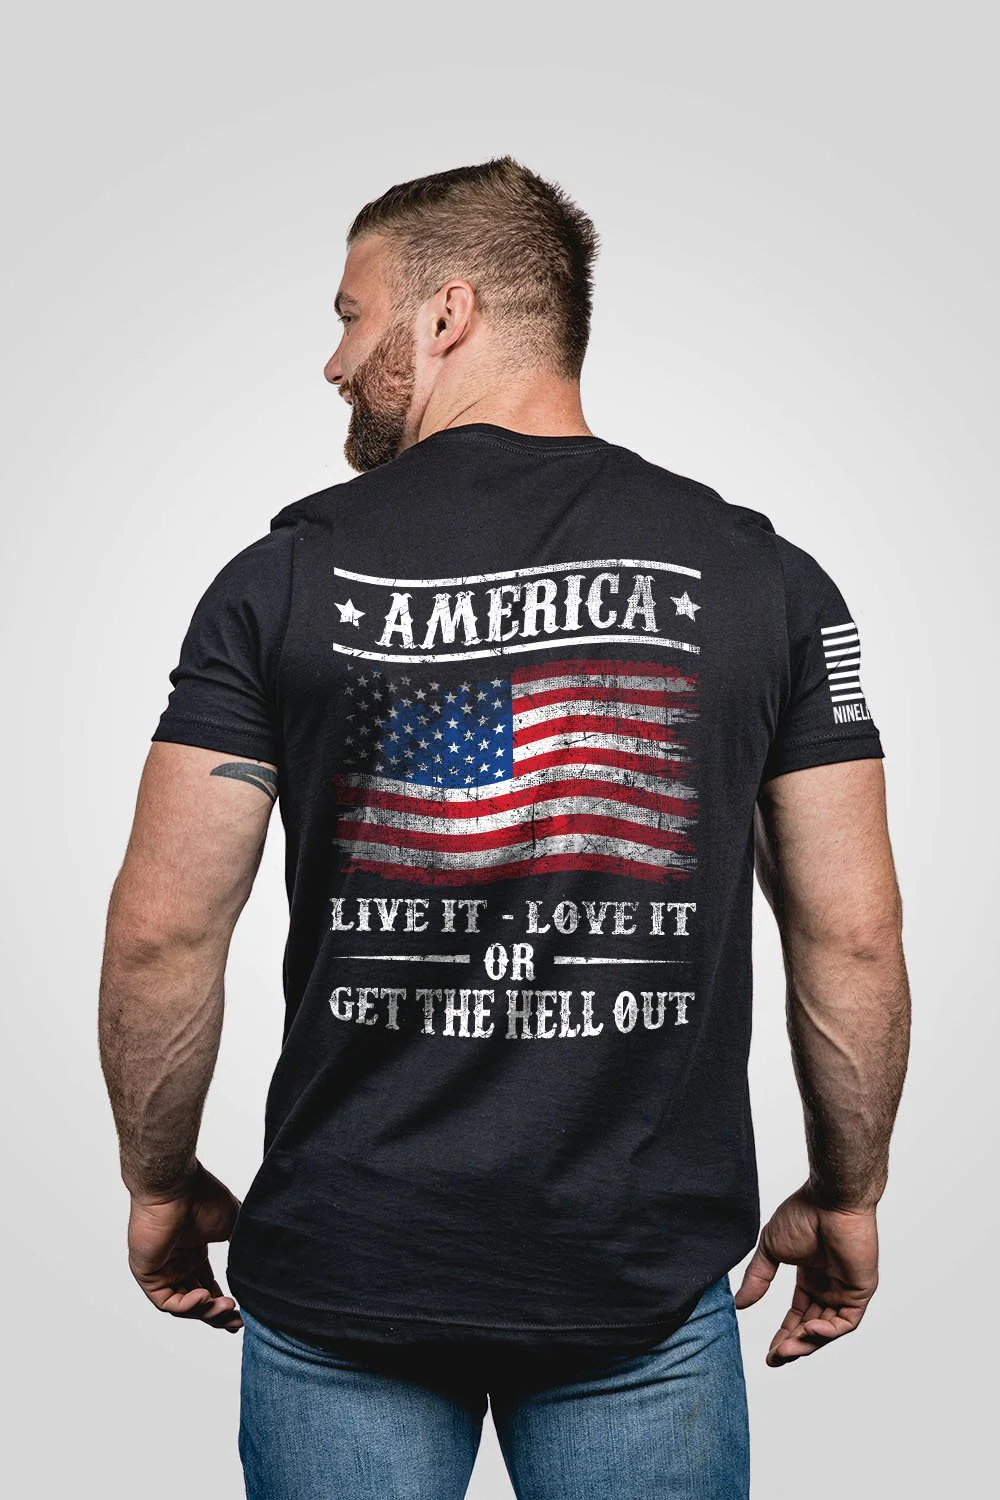 Nine Line Men's Get The Hell Out T-Shirt posted by ProdOrigin USA in Men's Apparel